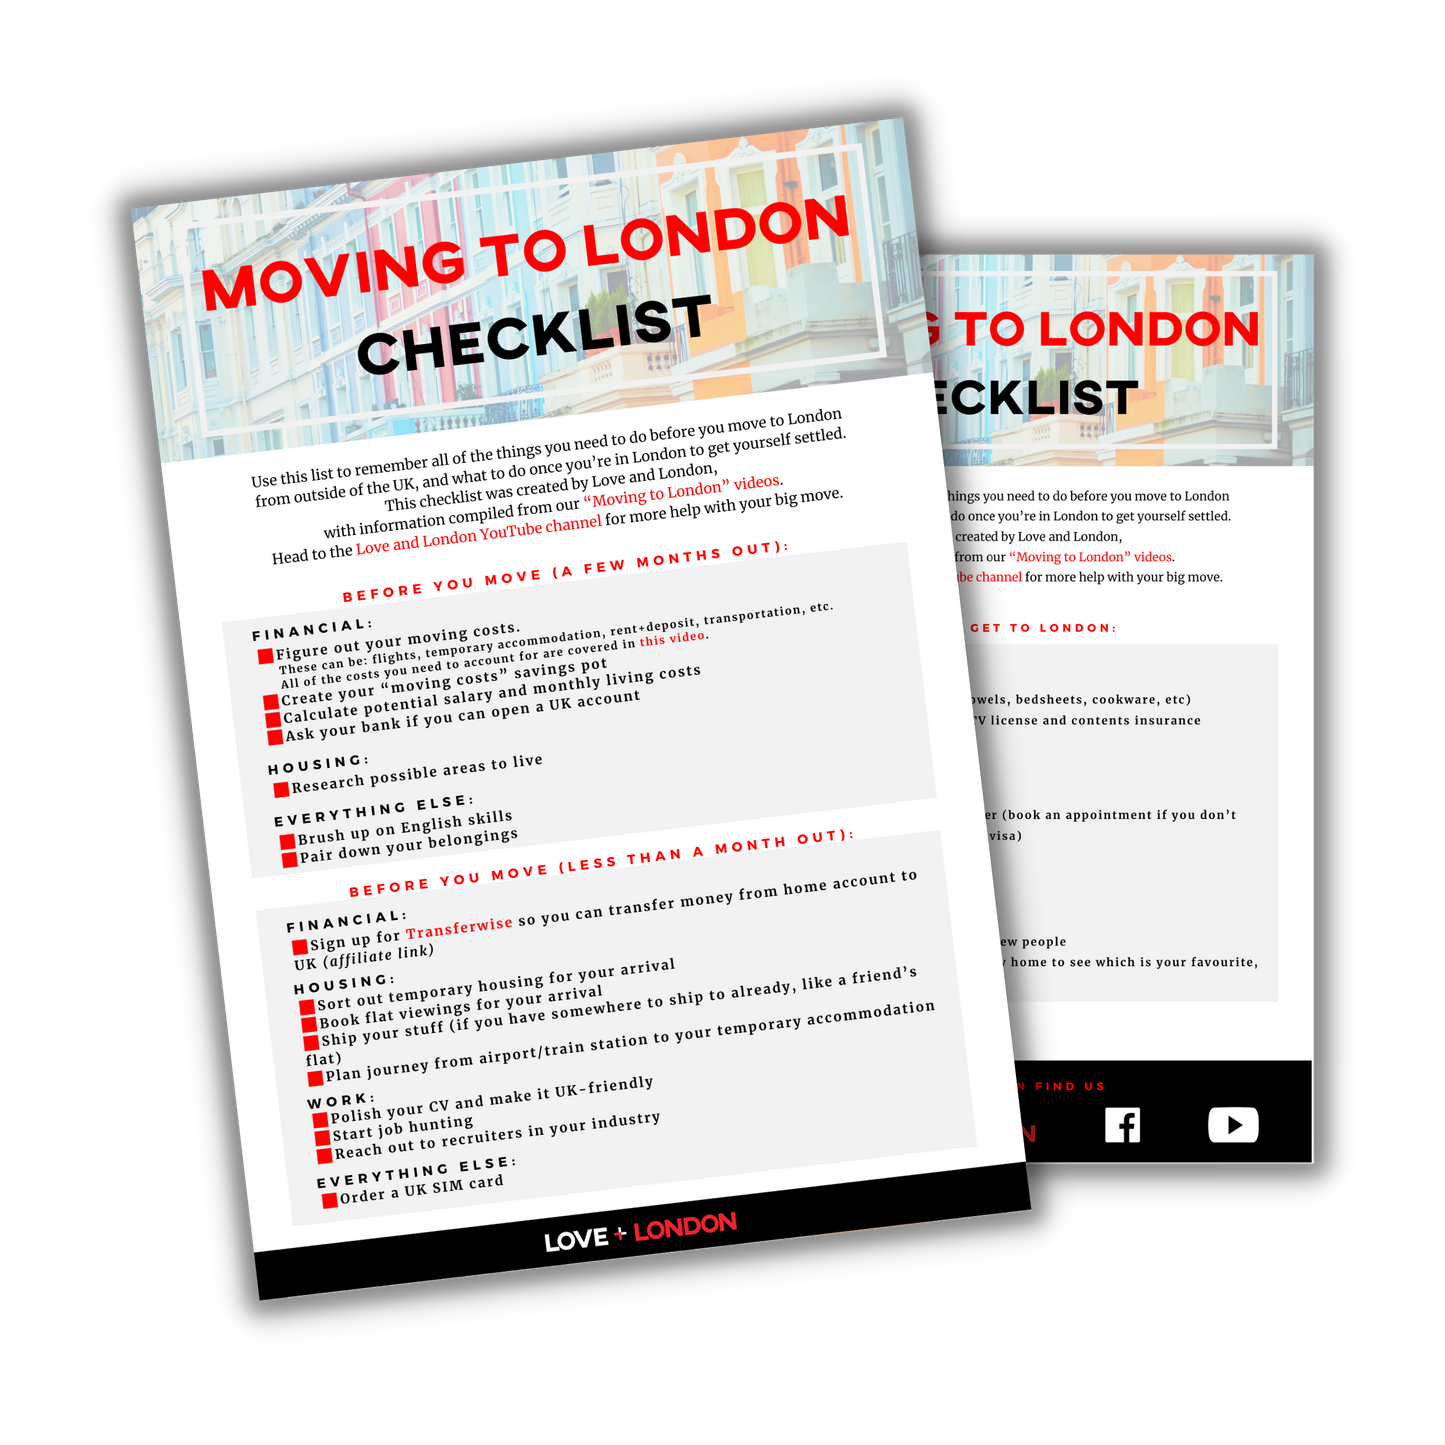 Moving to London Virtual Event - Recording and PDF